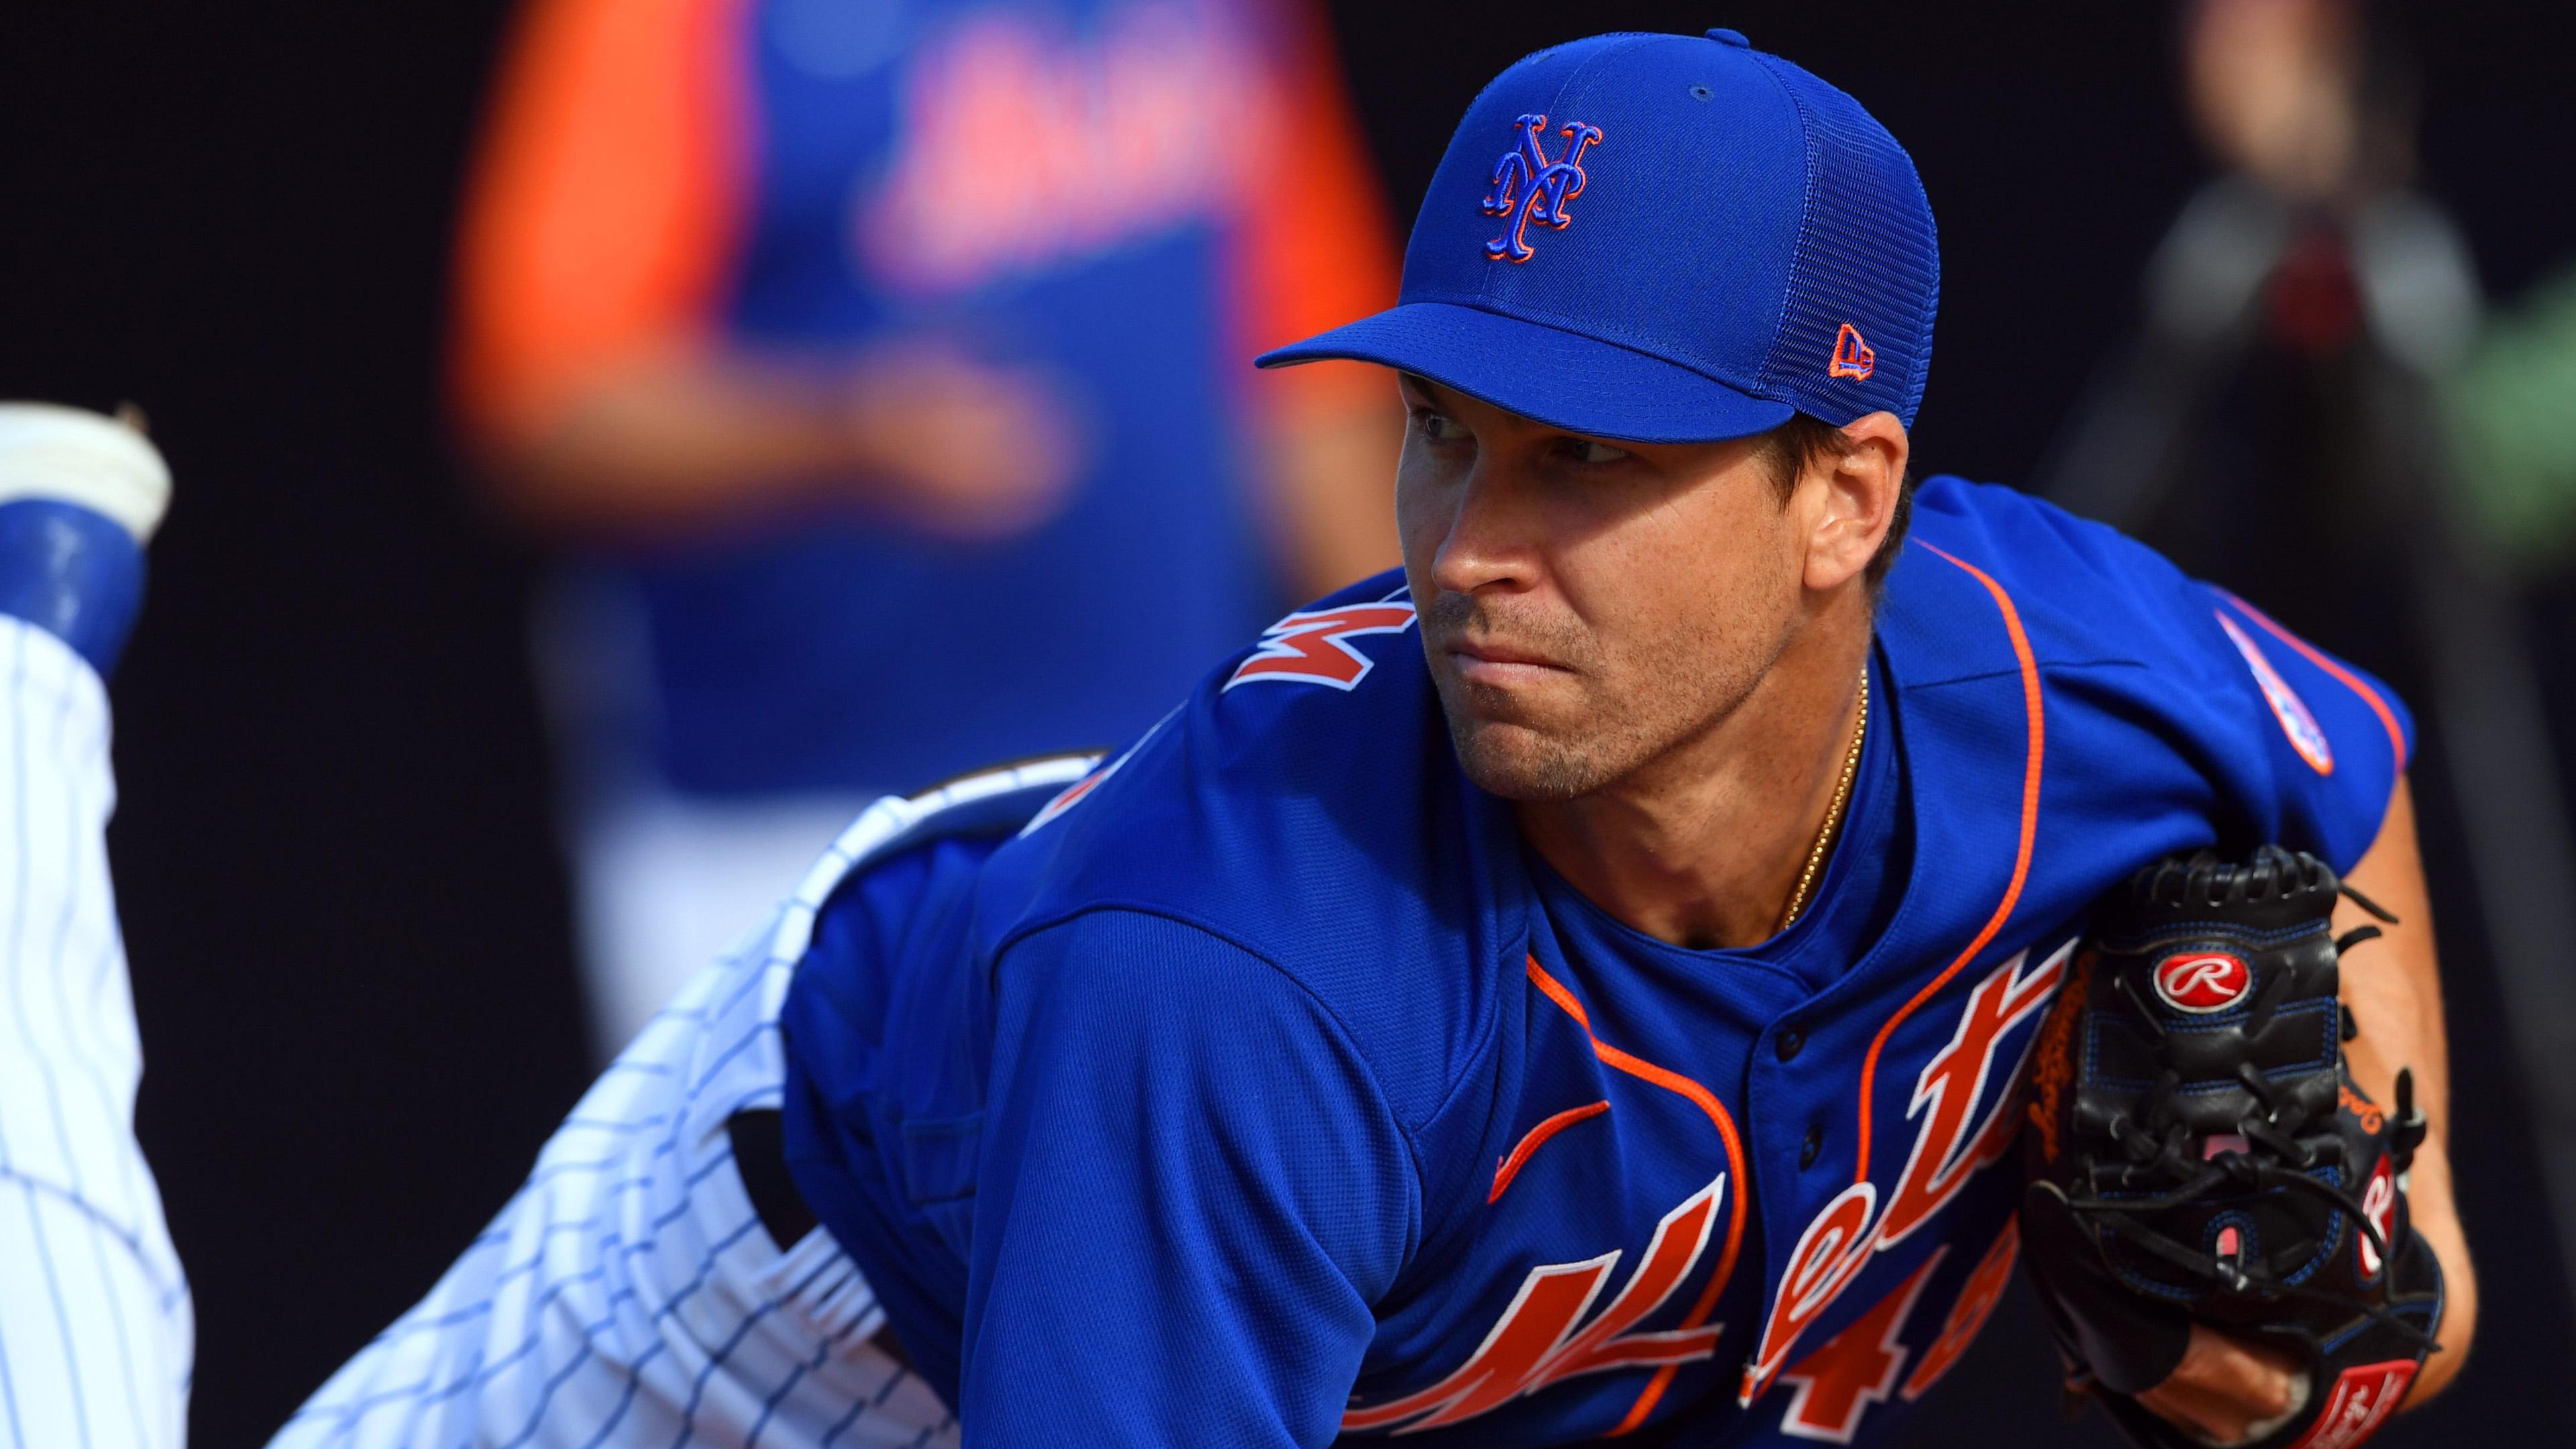 Jacob deGrom / PATRICK DOVE/TCPALM / USA TODAY NETWORK